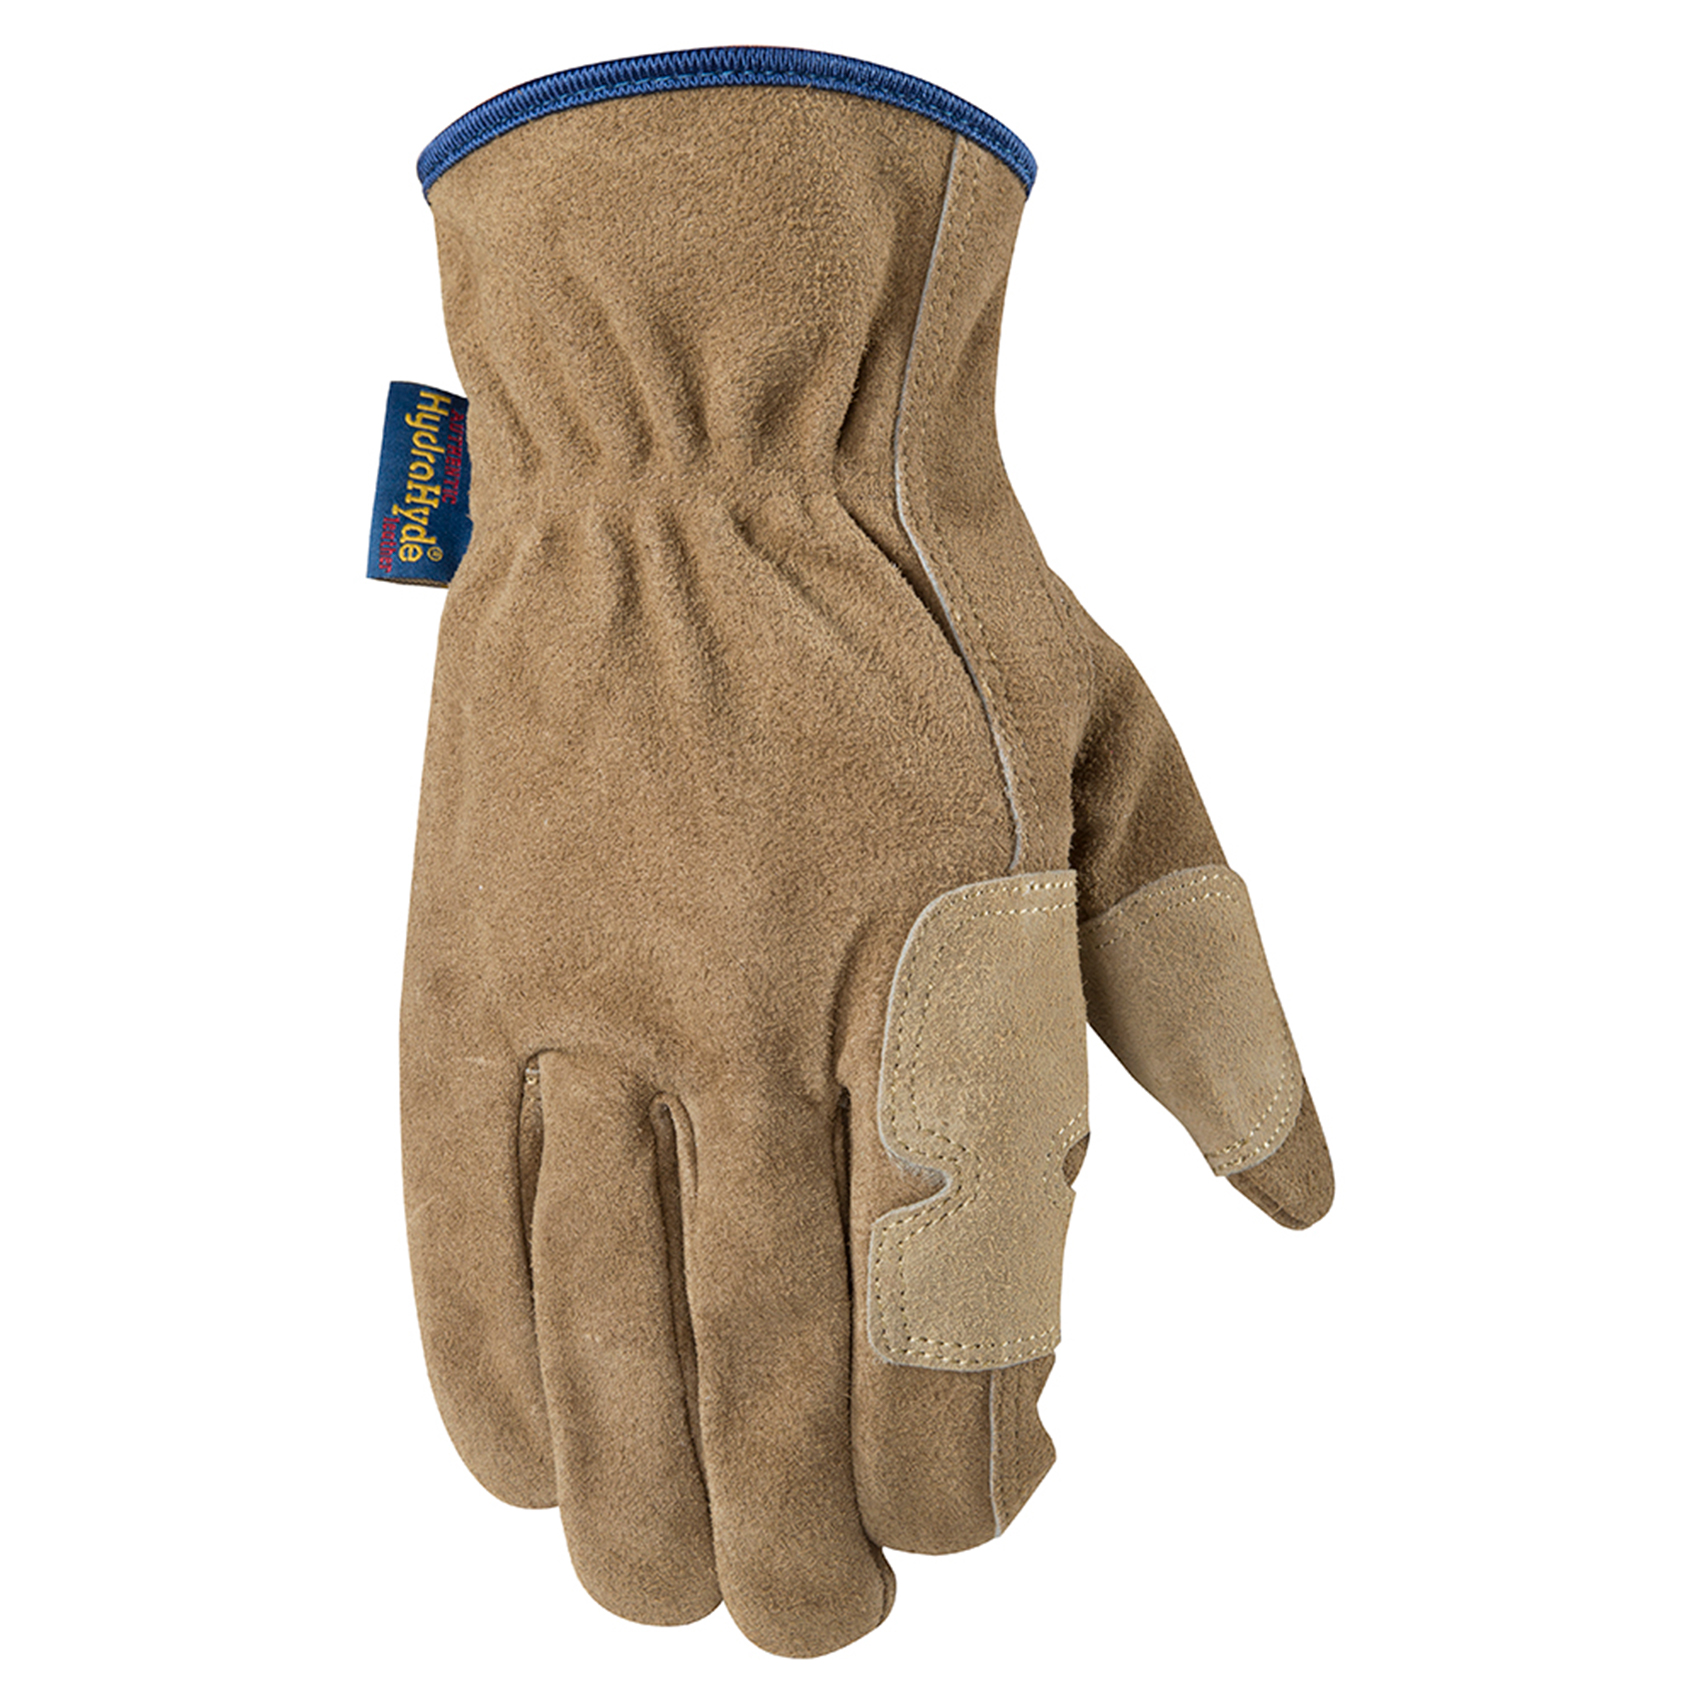 Wells Lamont HydraHyde 1019XL Fencer Gloves, Men's, XL, Keystone, Reinforced Thumb, Cowhide Suede Leather, Brown/Tan